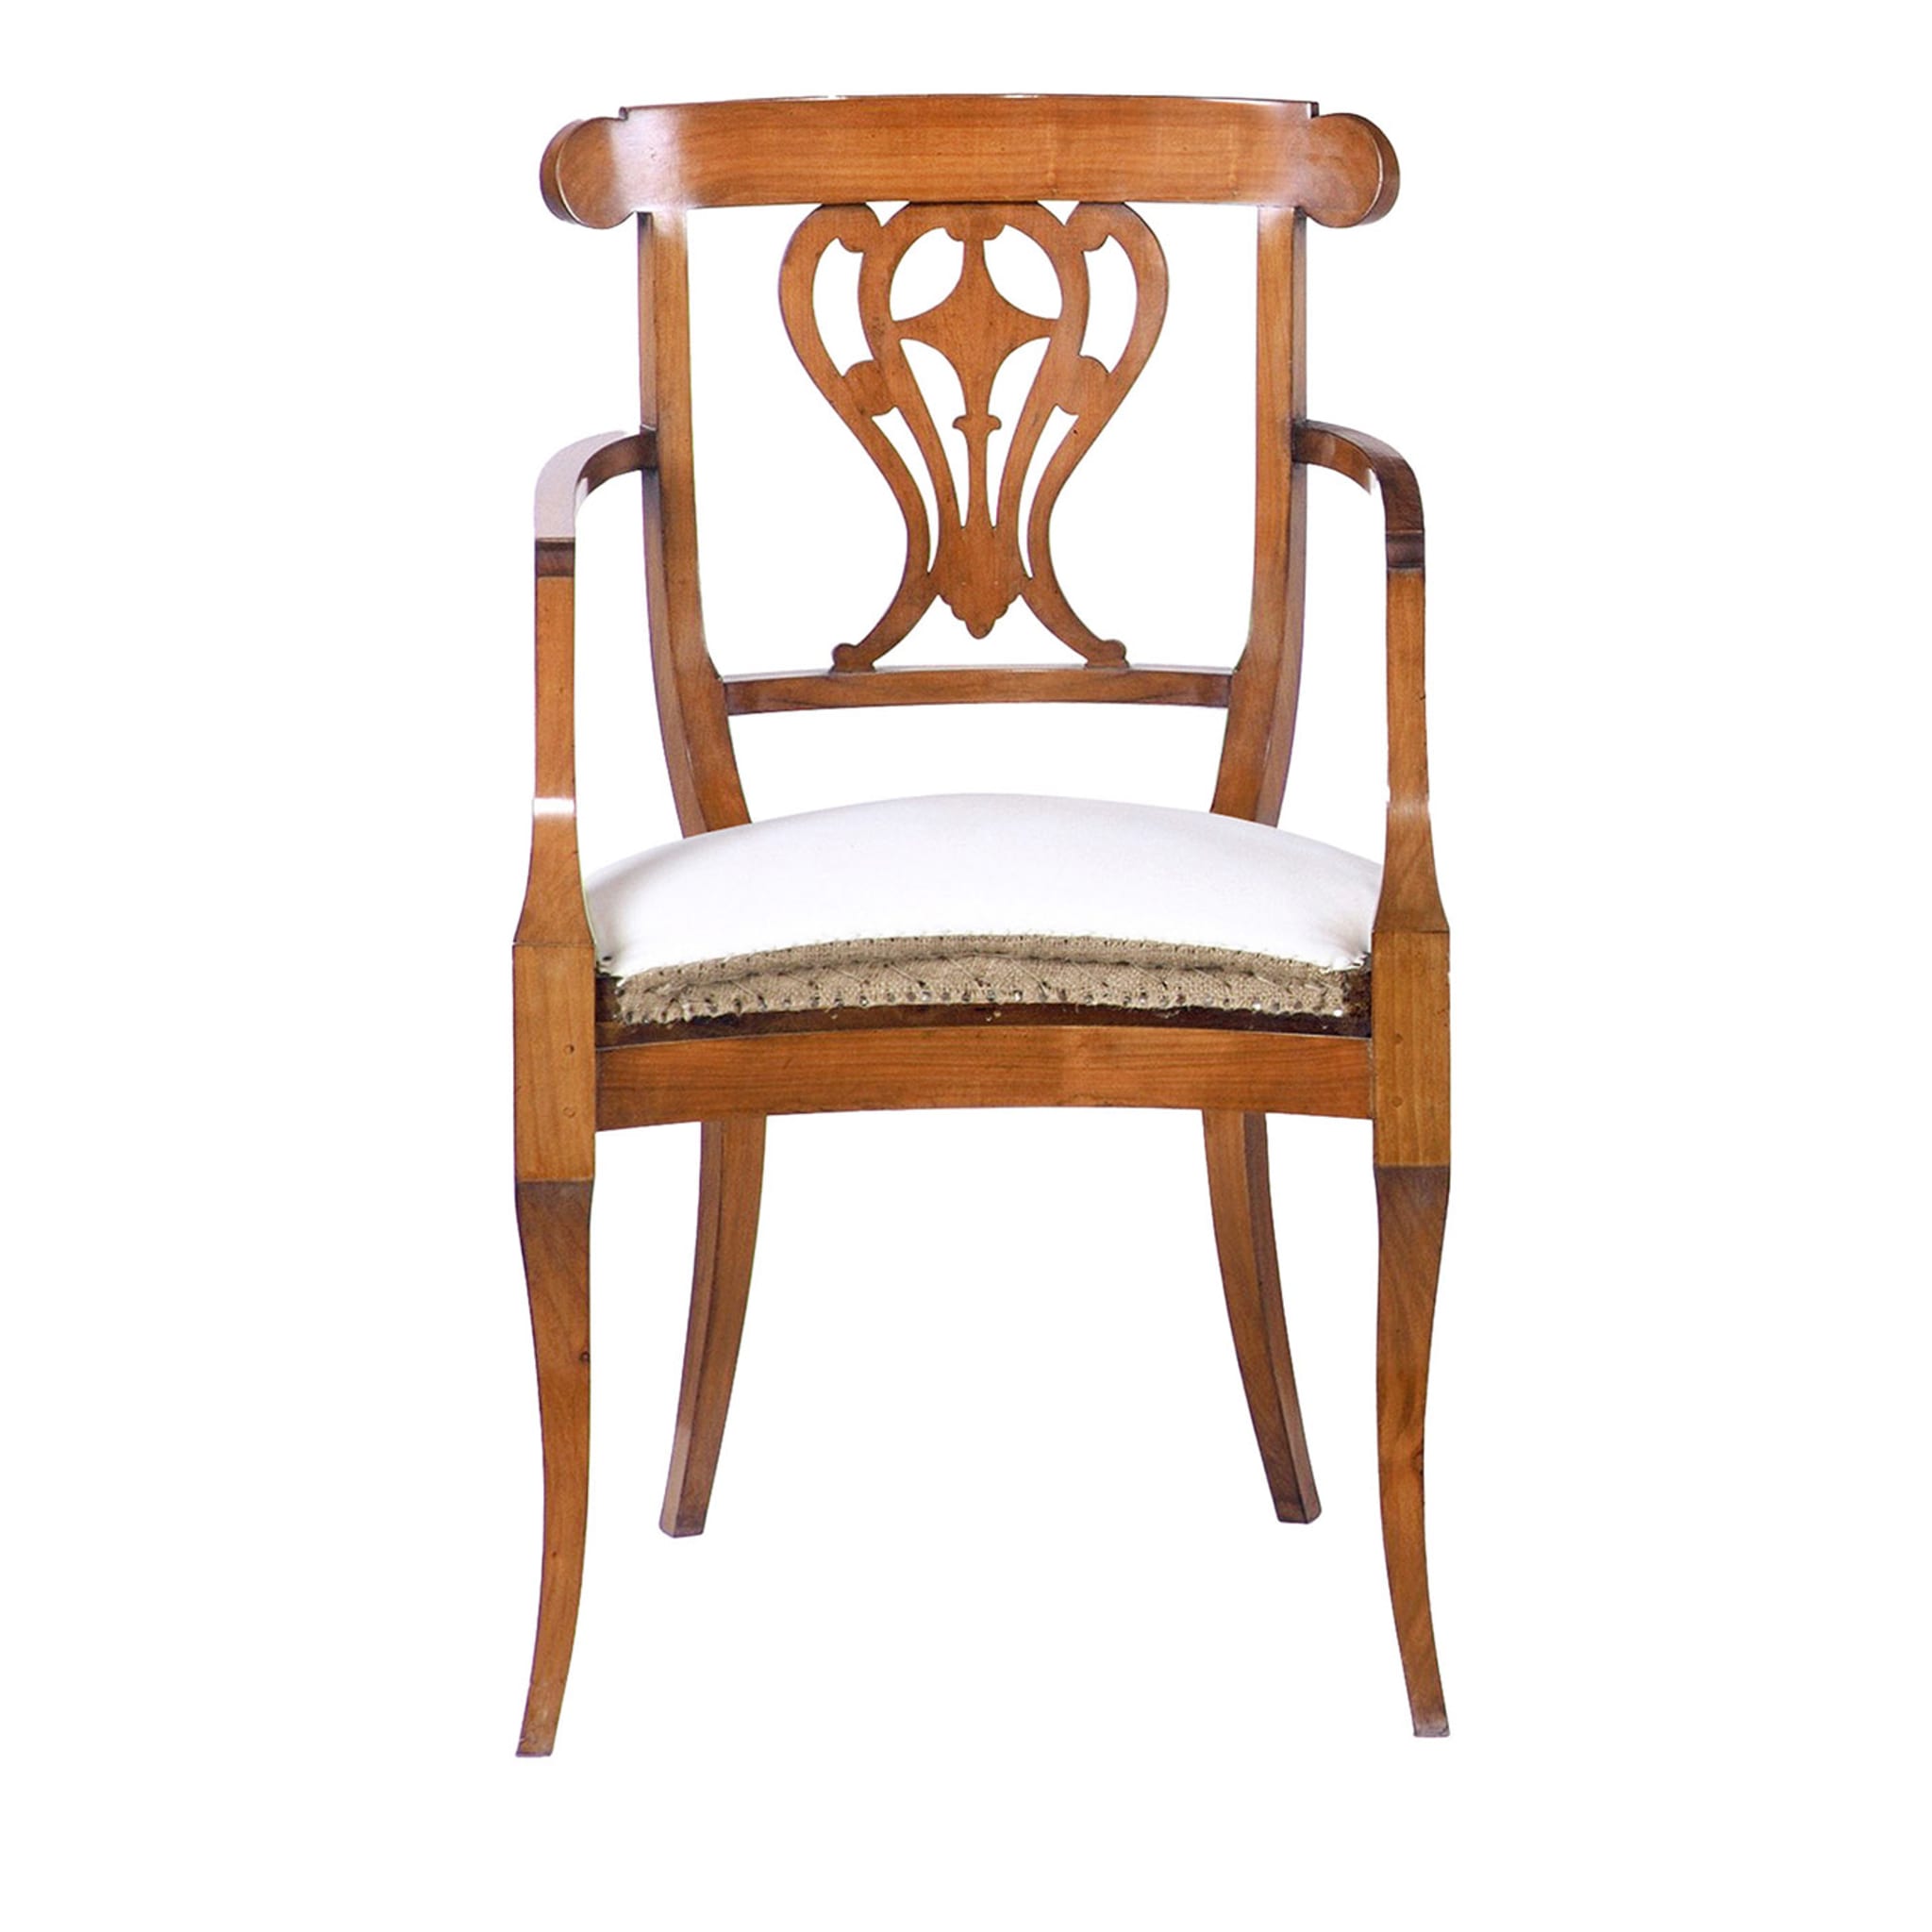 French Empire-Style Cherry Chair With Arms - Main view